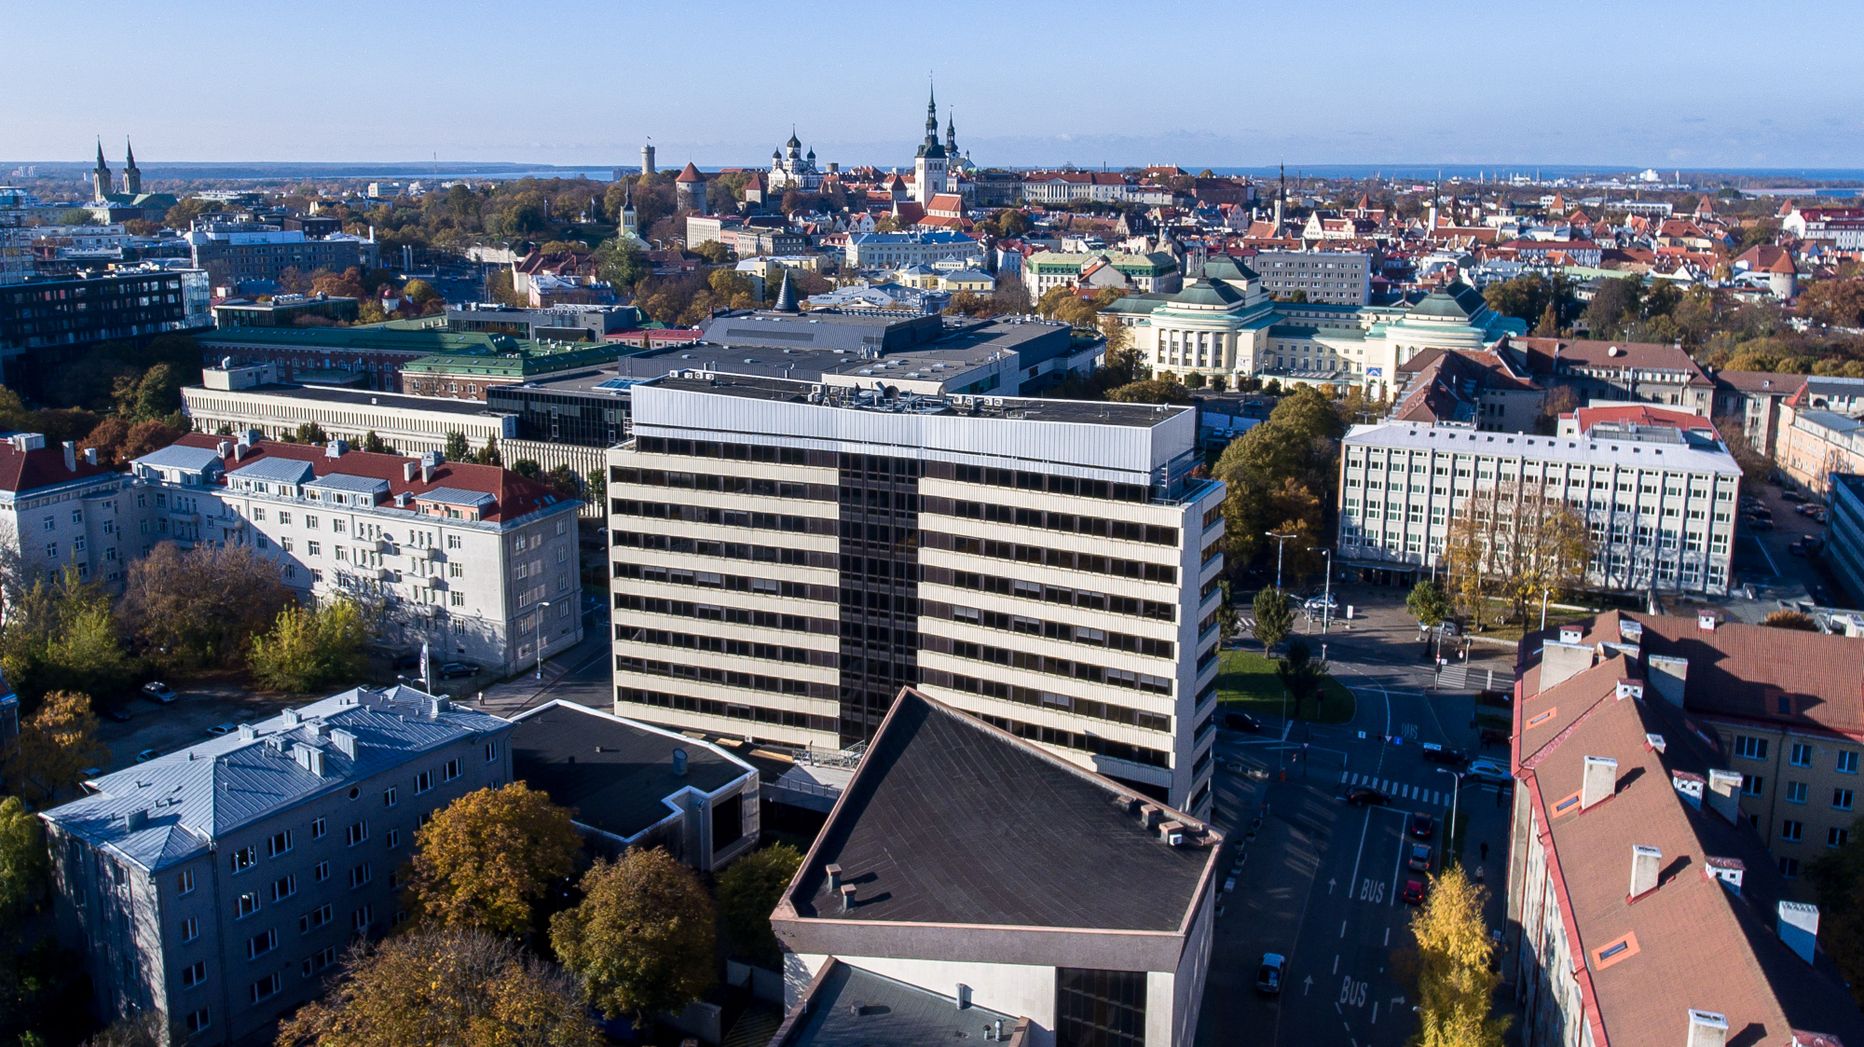 Due to state budget spending cuts, the Estonian Ministry of Foreign Affairs is laying off 45 positions and closing the consulates general in New York and San Francisco.